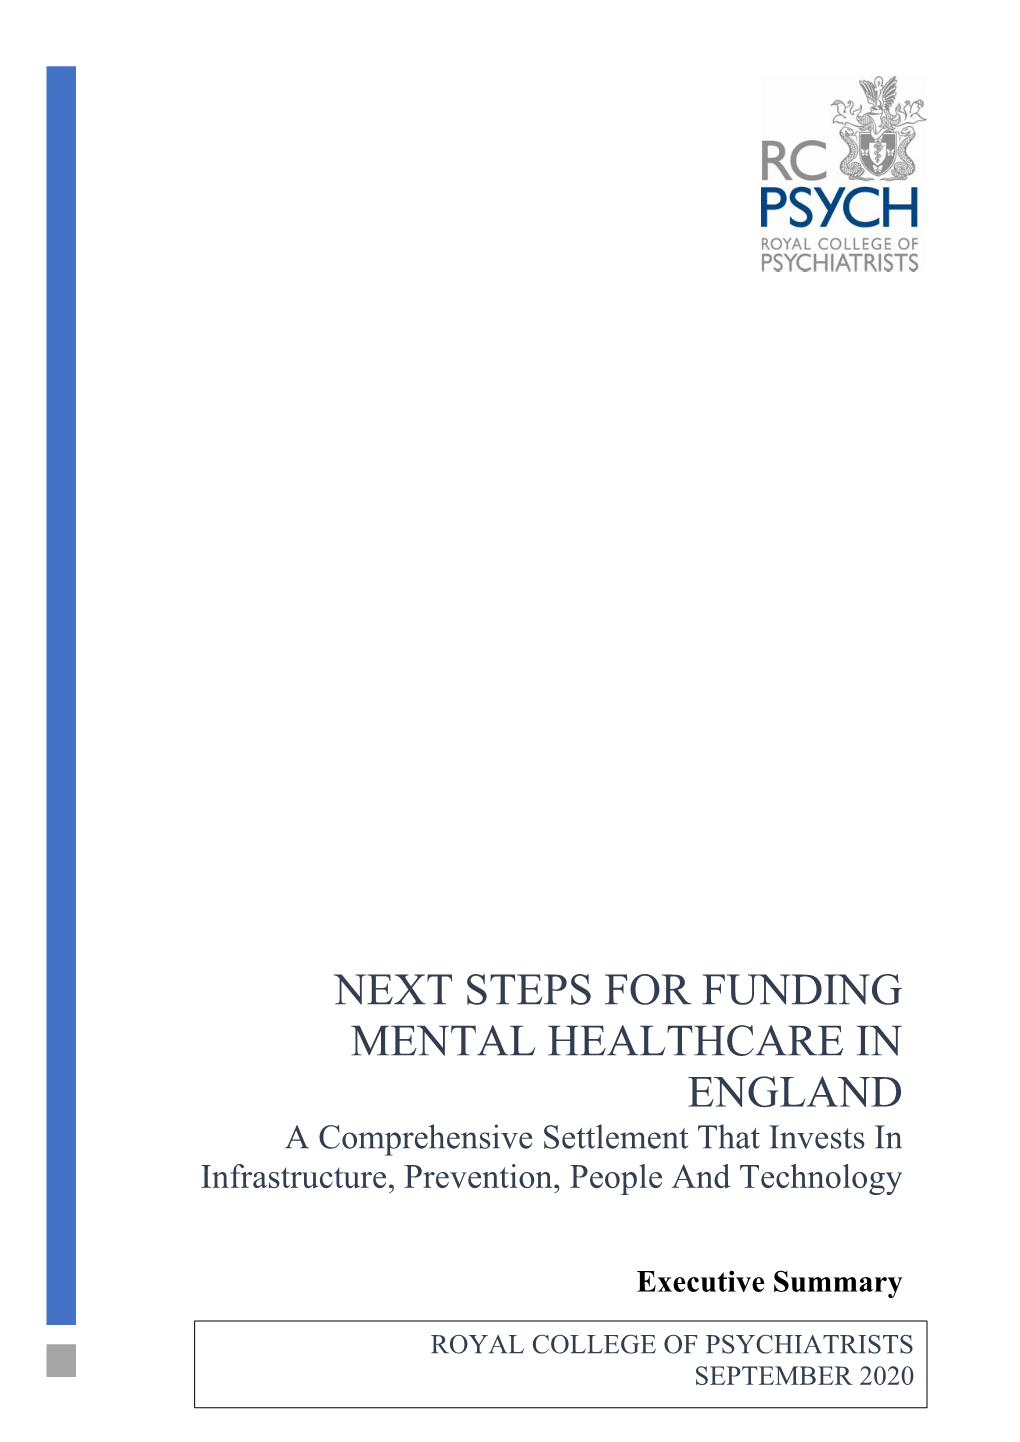 NEXT STEPS for FUNDING MENTAL HEALTHCARE in ENGLAND a Comprehensive Settlement That Invests in Infrastructure, Prevention, People and Technology